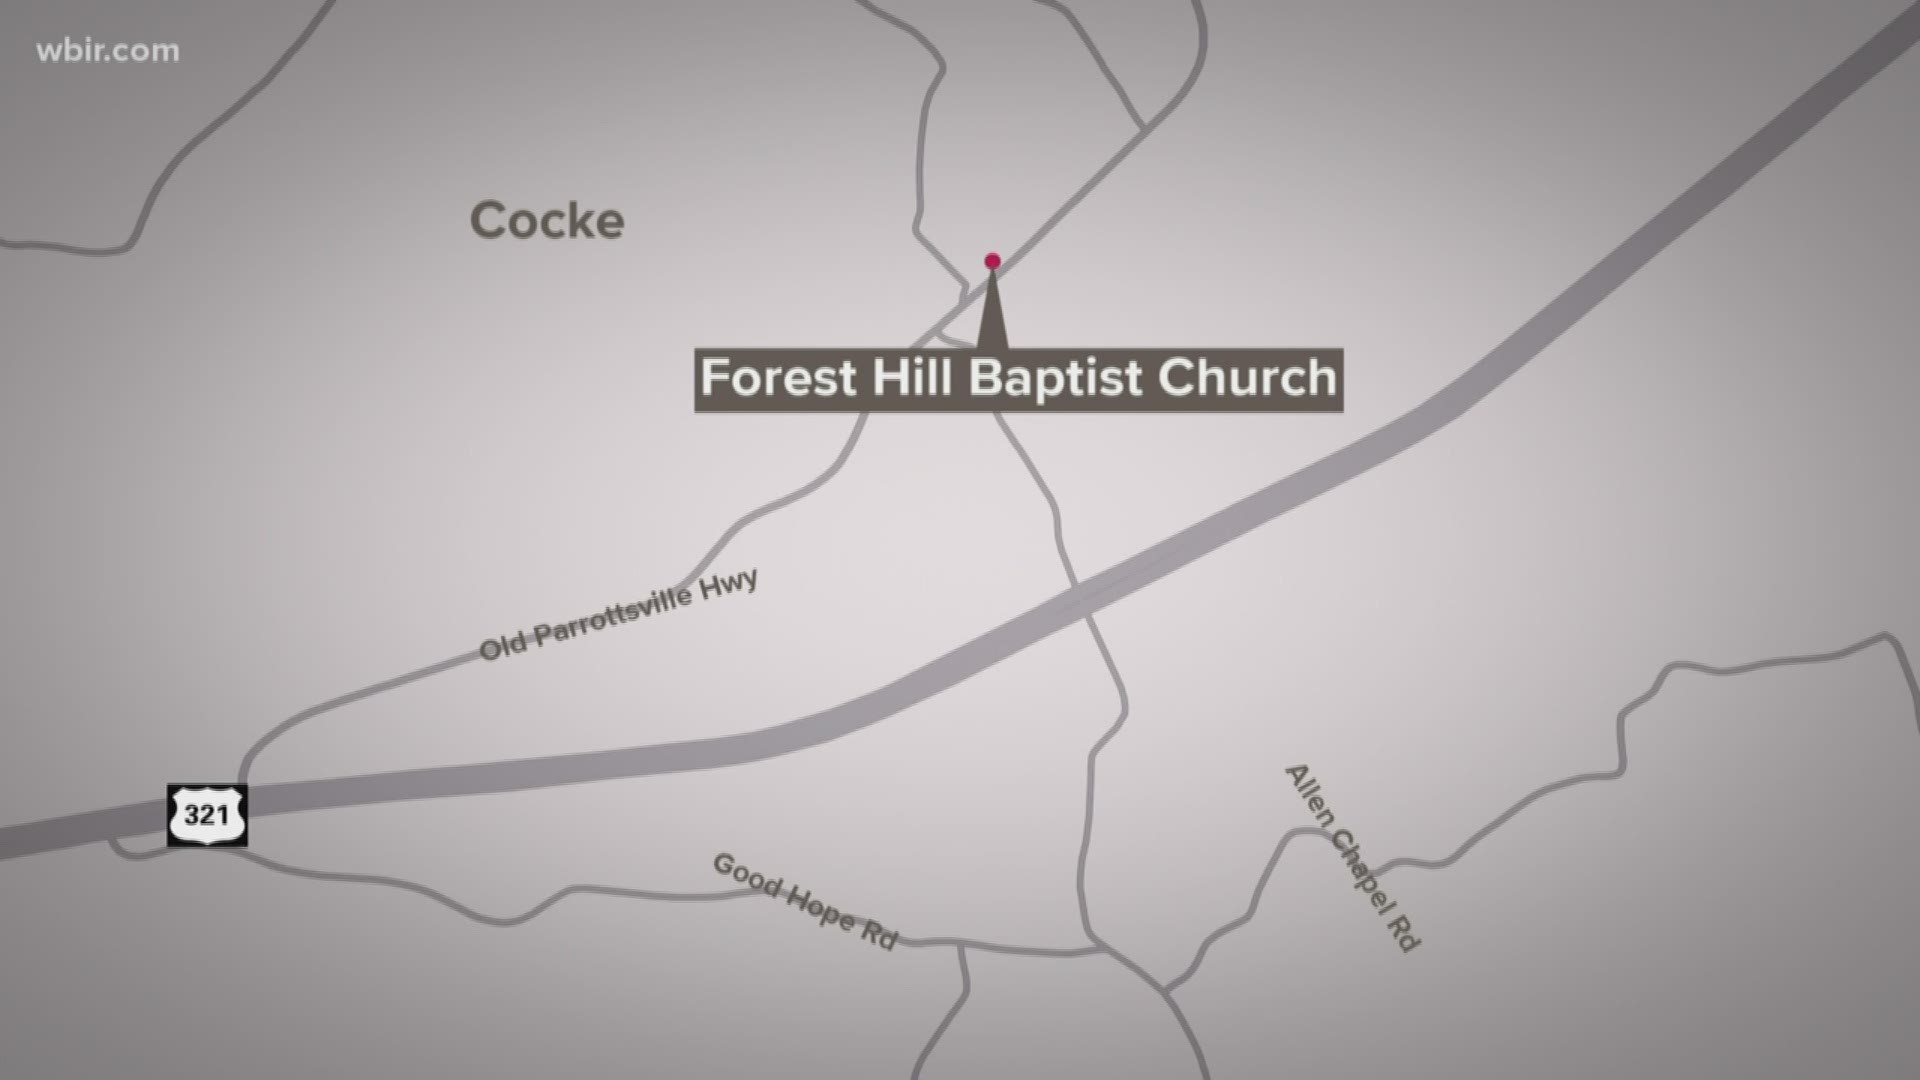 County officials said a fire burned down Forest Hill Baptist Church Saturday morning. No one was hurt, but the fire resulted in a water line break nearby.